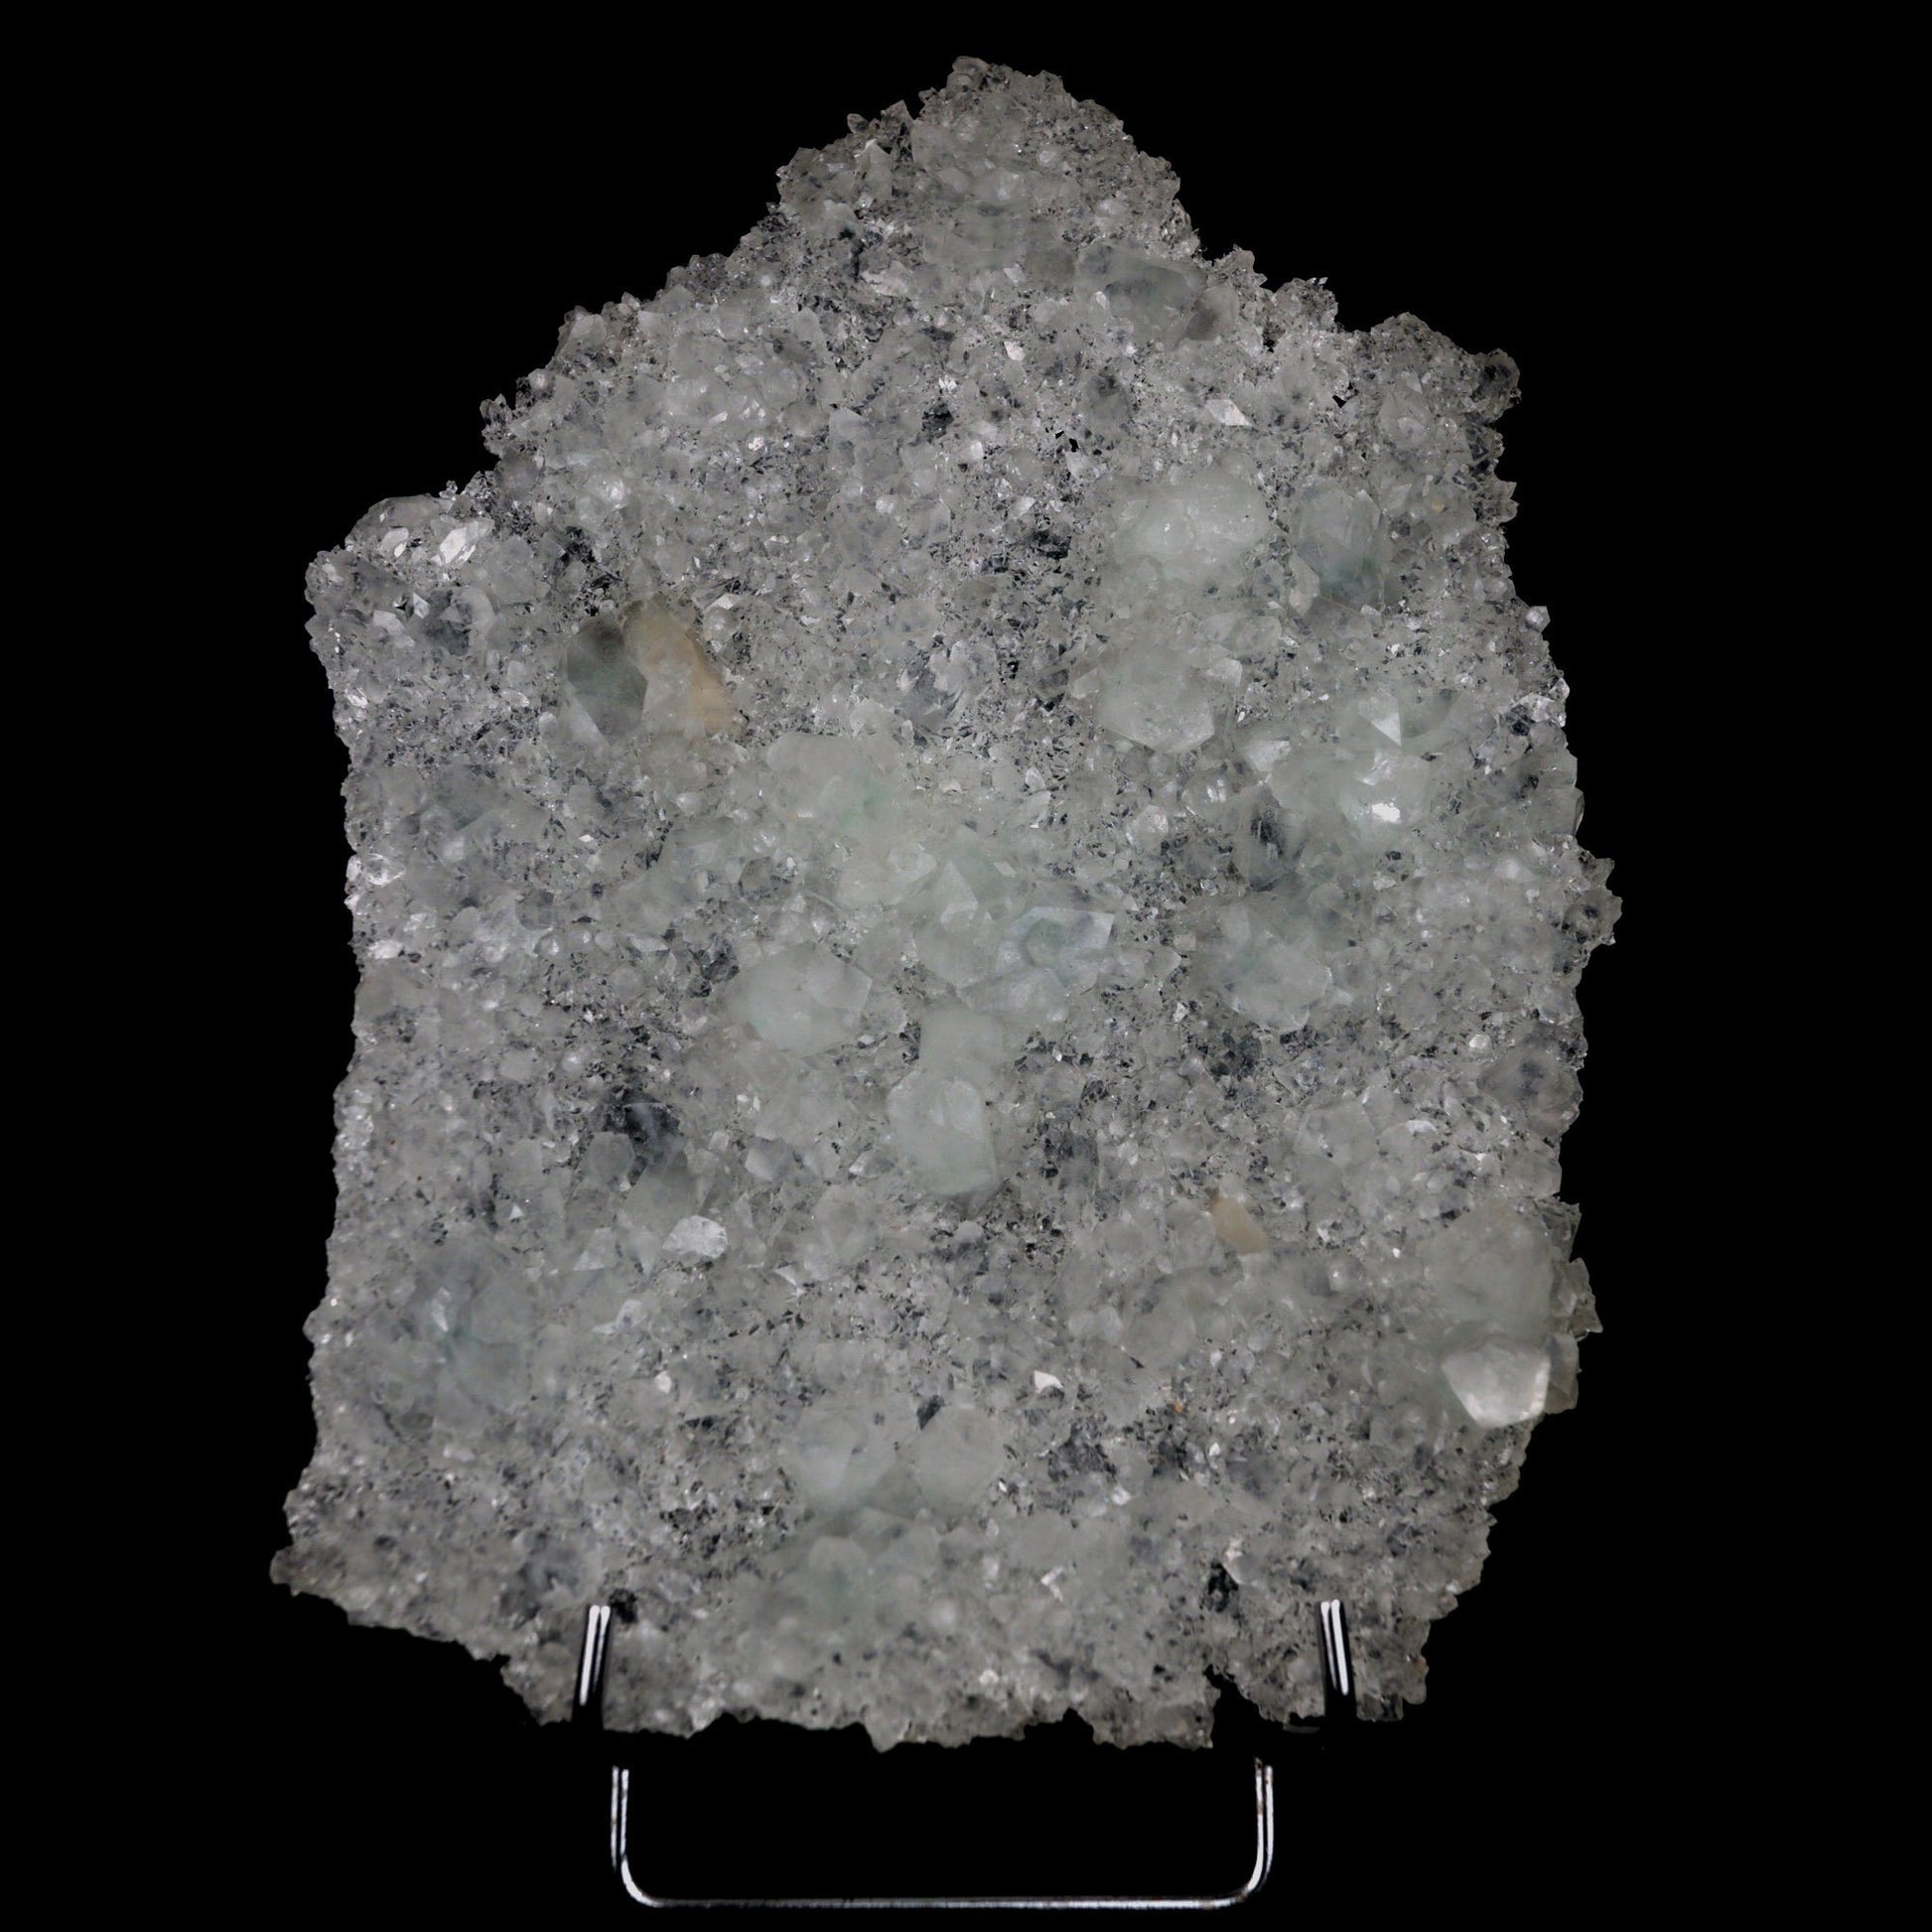 Gemmy Apophyllite Slice Natural Mineral Specimen # B 4731  https://www.superbminerals.us/products/gemmy-apophyllite-slice-natural-mineral-specimen-b-4731  Features: Exceptional glistening gemmy Apophyllite is a very thin and fragile slice of rock. Primary Mineral(s): ApophylliteSecondary Mineral(s): N/AMatrix: N/A9.00 Inch x 6.3 Inch Weight : 600 gms Locality: Nashik, Maharashtra, India